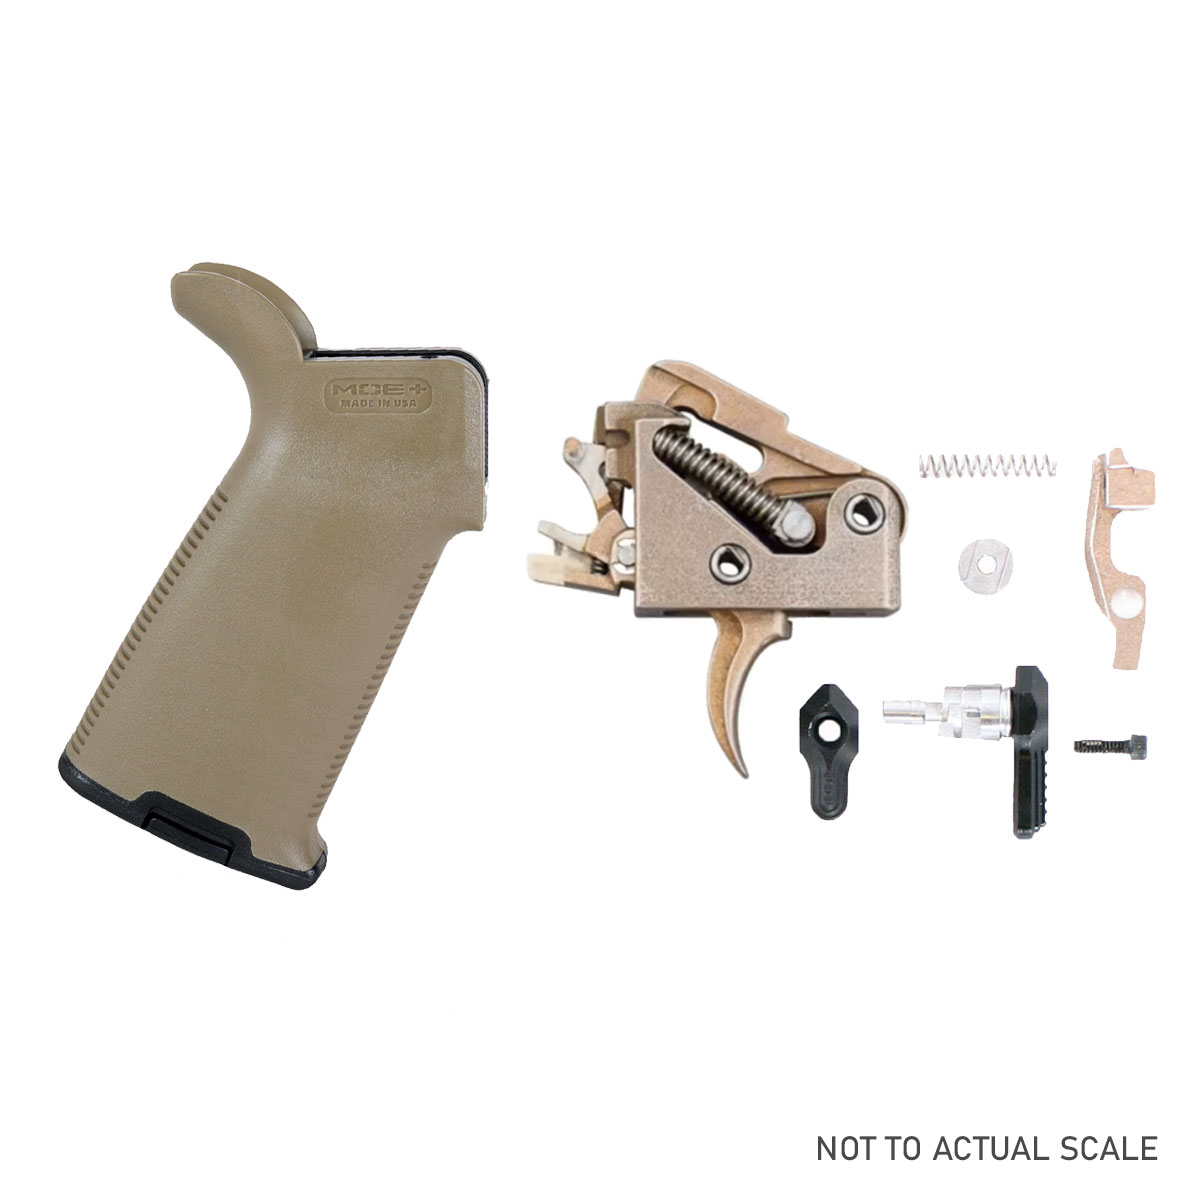 Speed Up Your Lower Kit: Fostech AR-15 Drop In Echo AR-II Binary Trigger + Magpul Industries, MOE Grip, Fits AR Rifles, with Storage Compartment, Flat Dark Earth